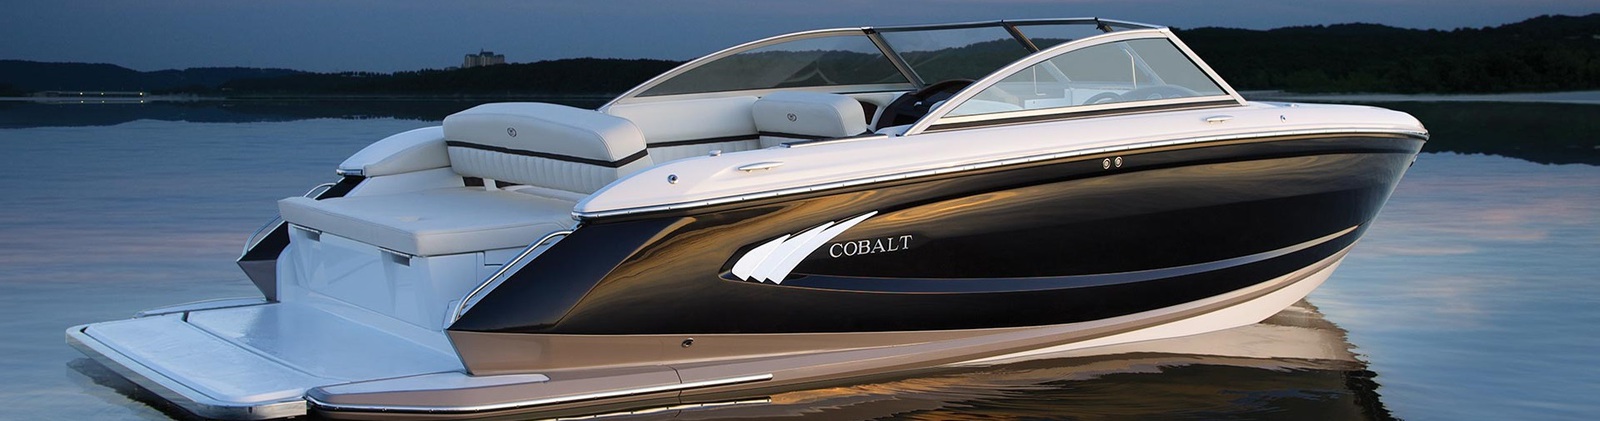 Cobalt boat on a body of water.